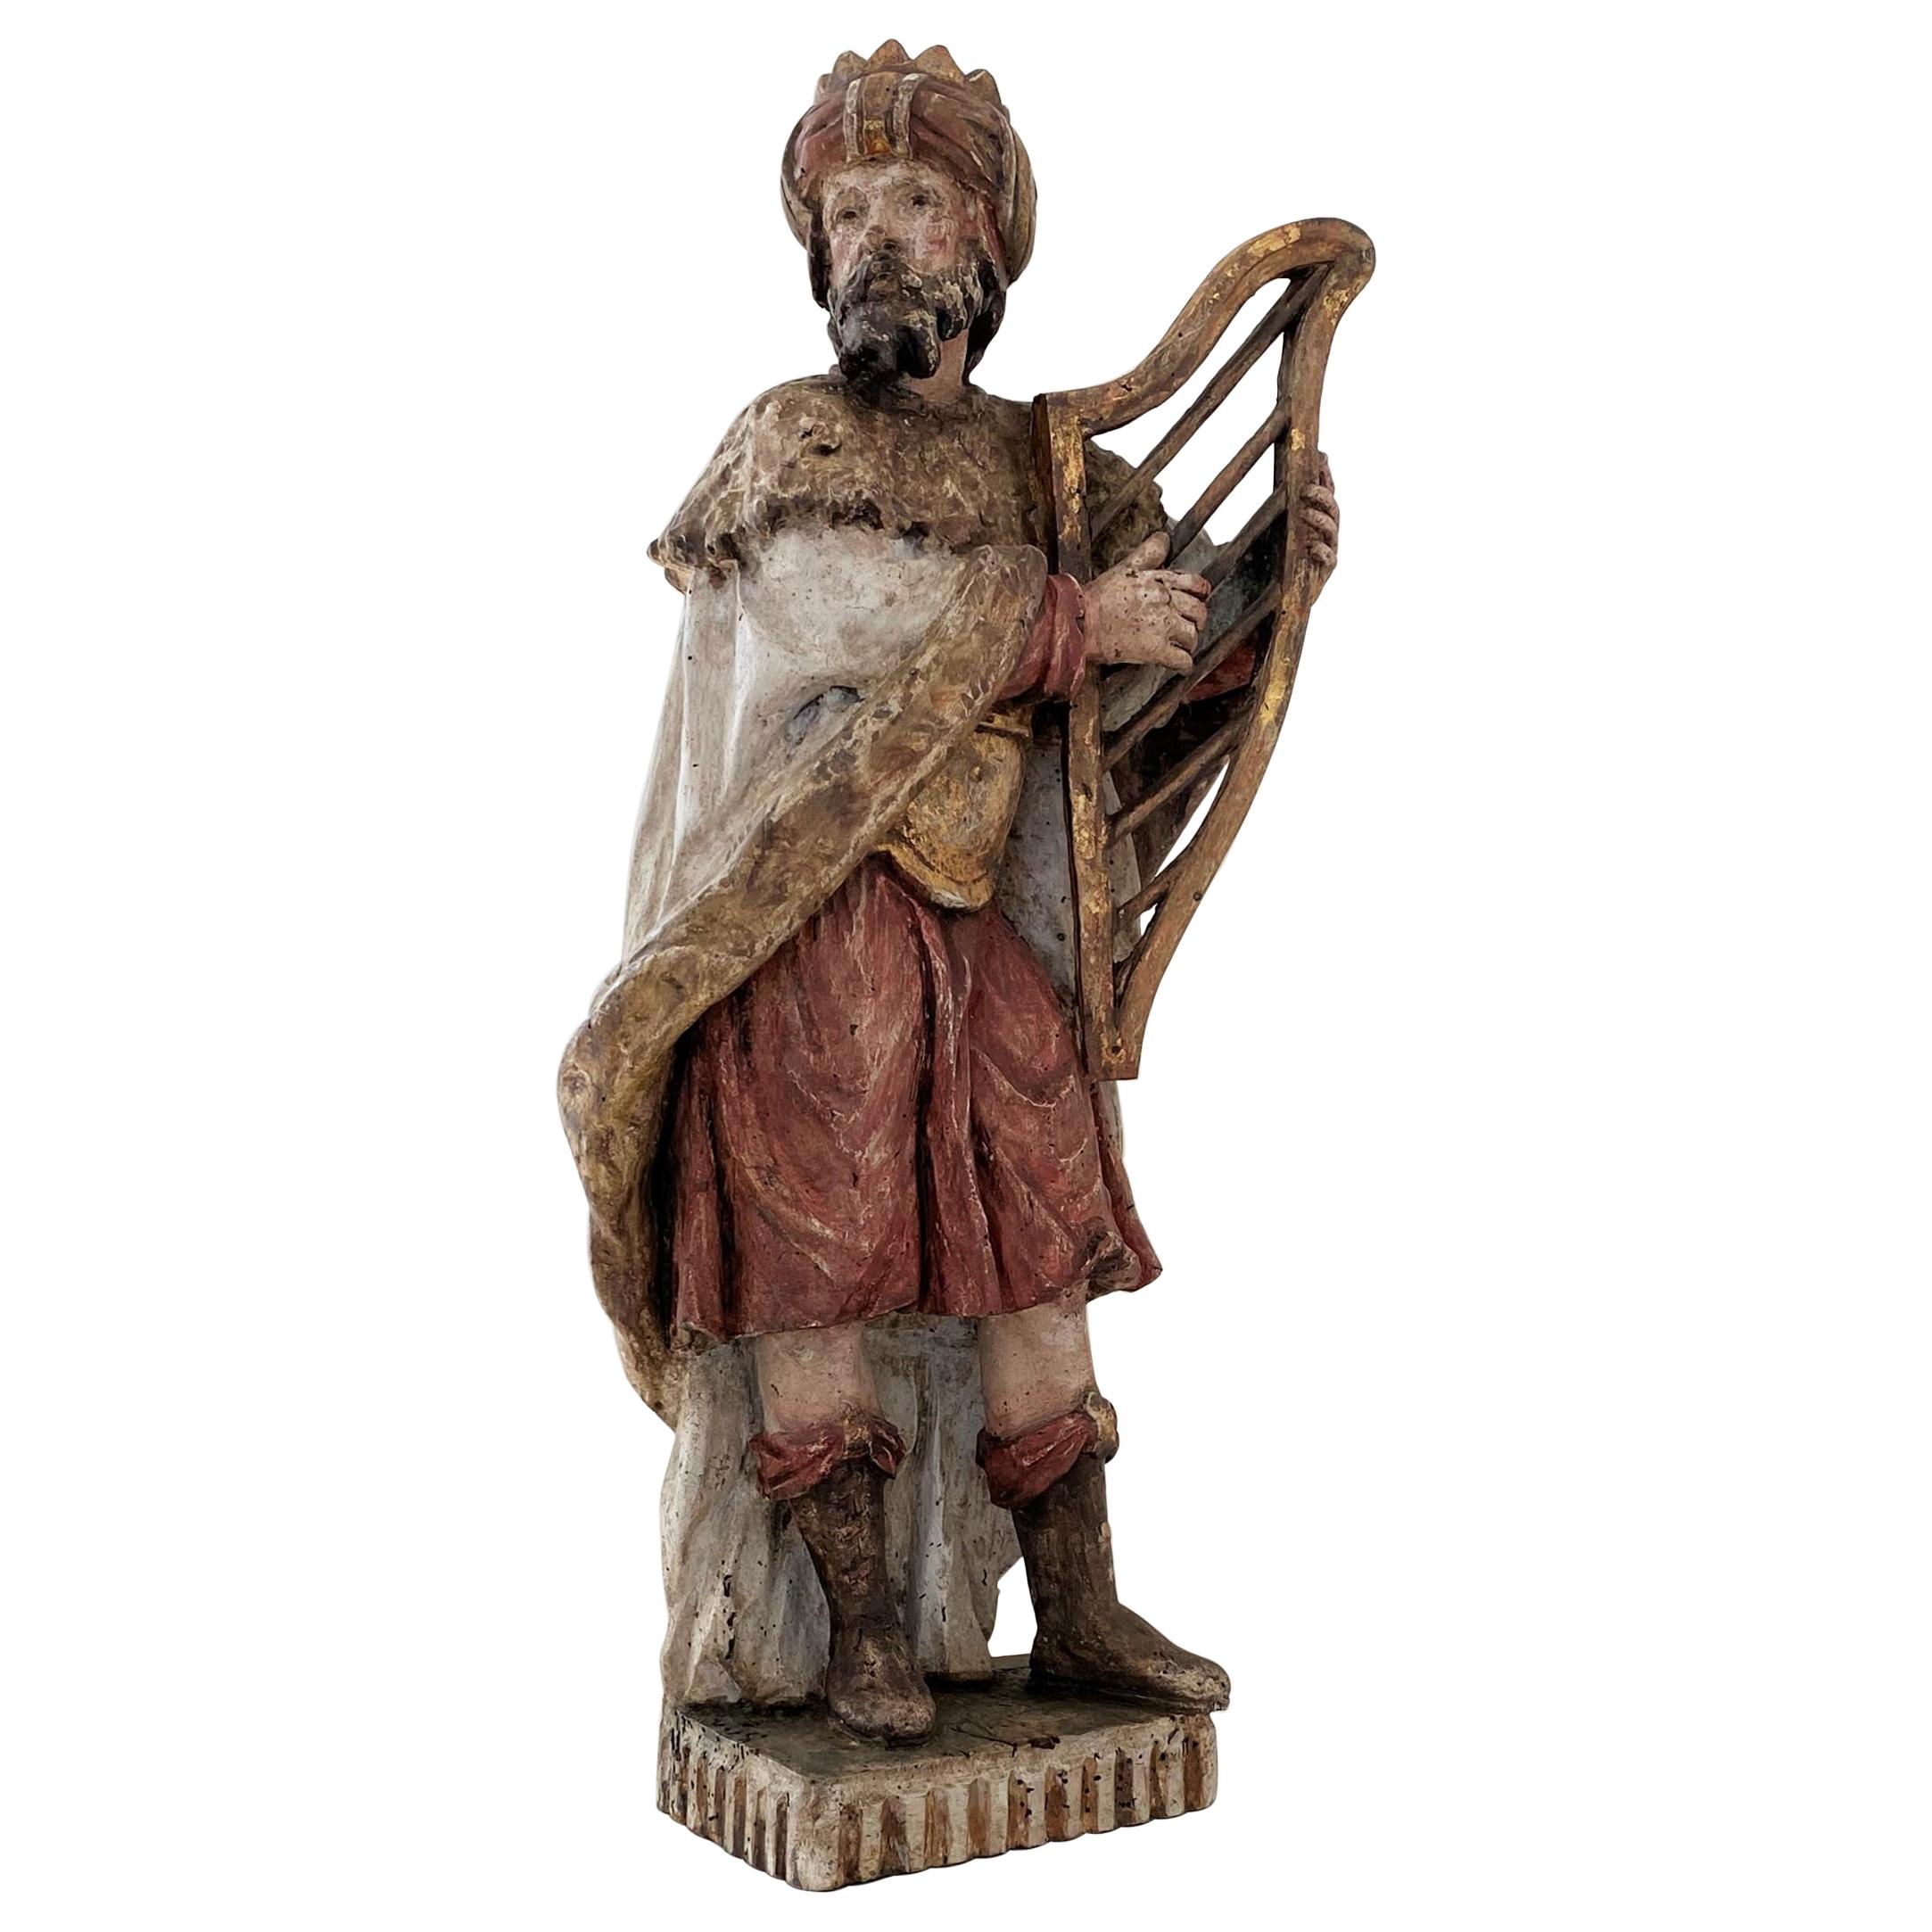 17th Century Polychrome Carved Sculpture of King David Playing the Harp